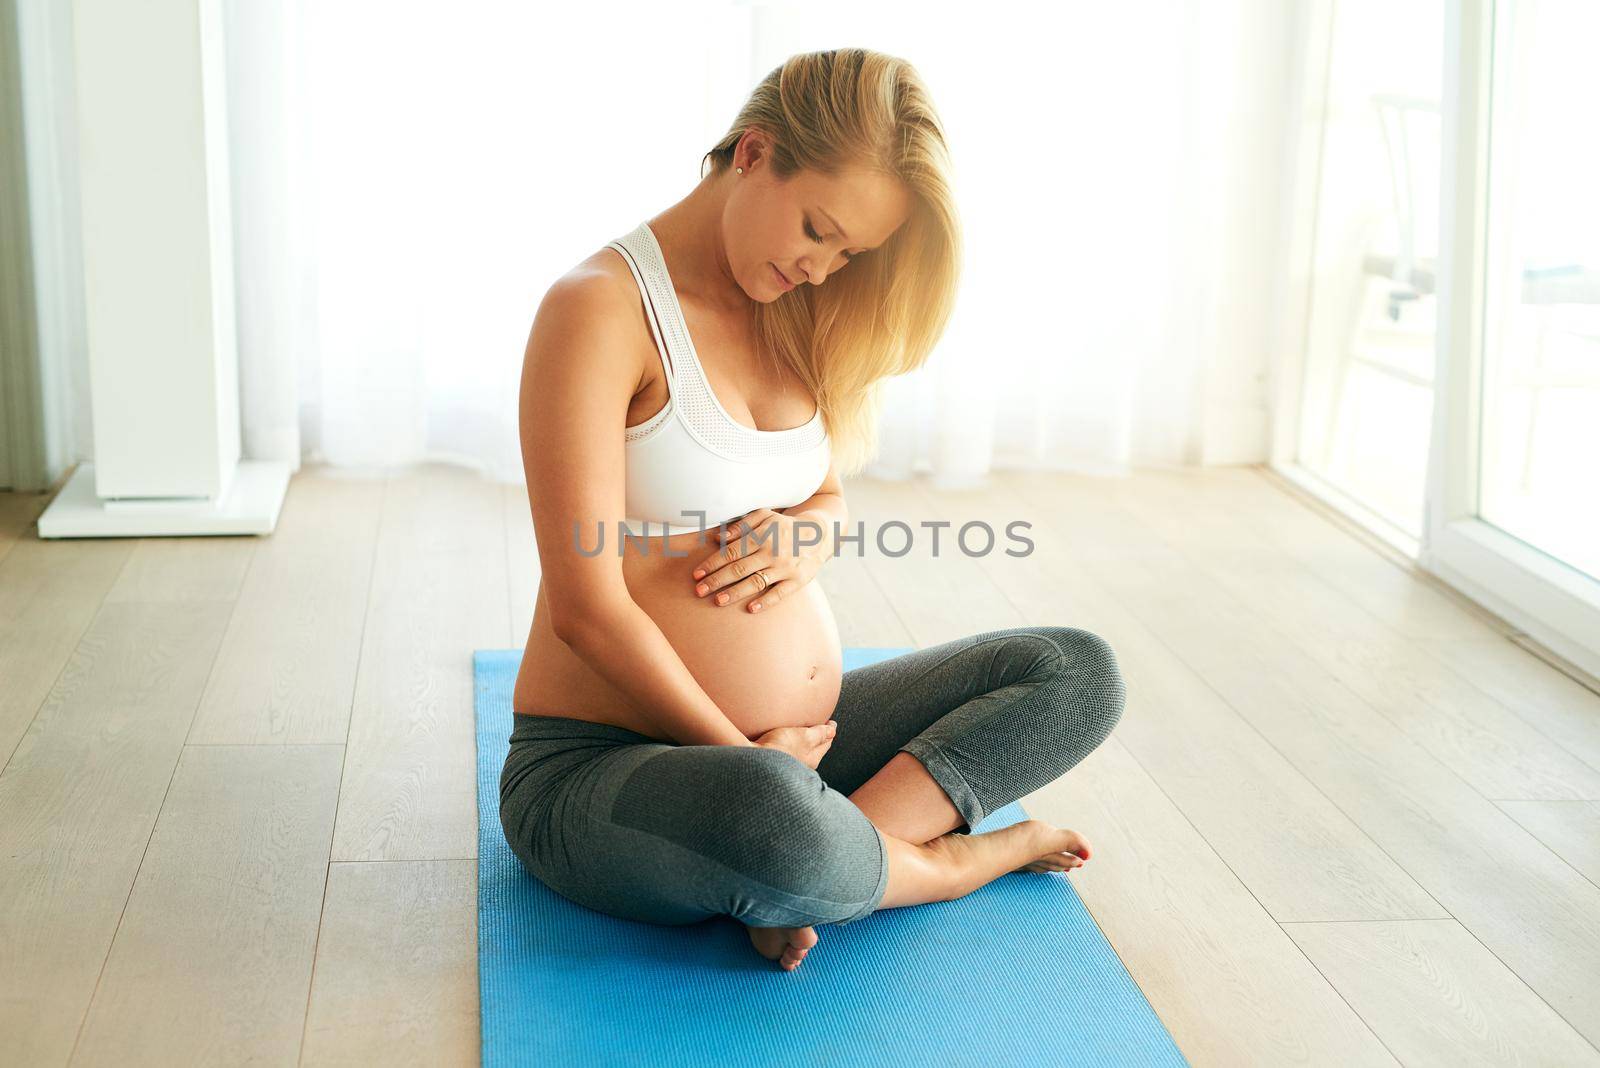 Healthy mama, healthy baby. a pregnant woman working out on an exercise mat at home